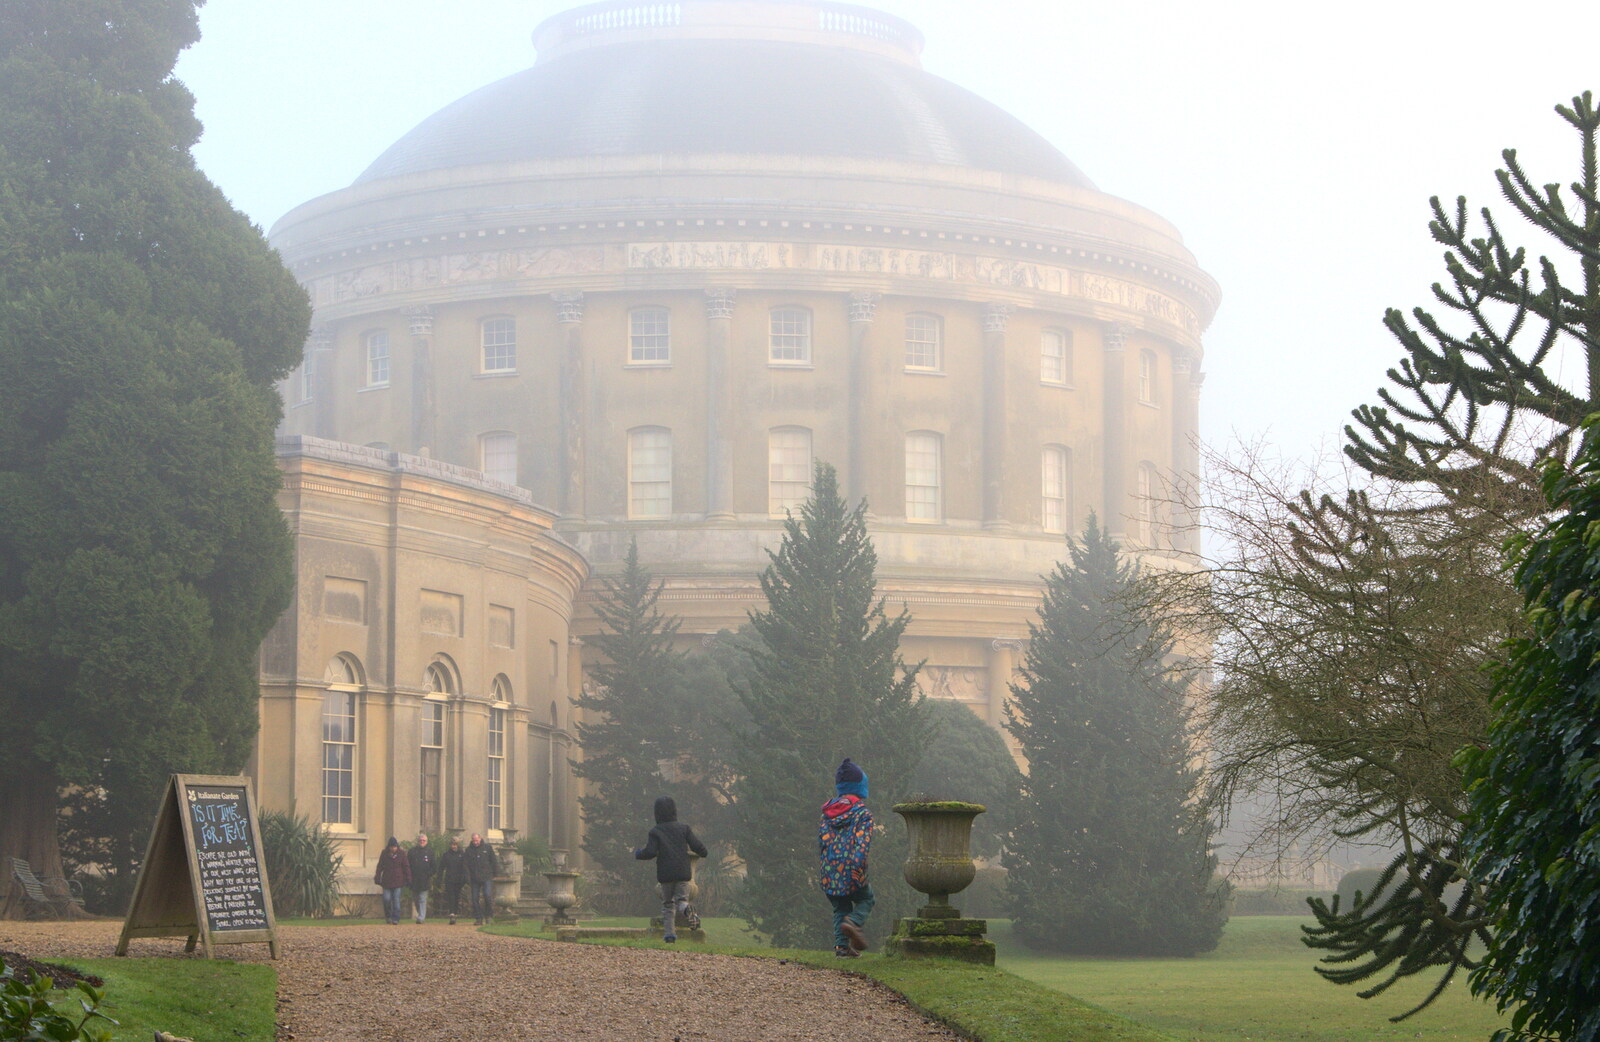  from A Trip to Ickworth House, Horringer, Suffolk - 30th December 2016